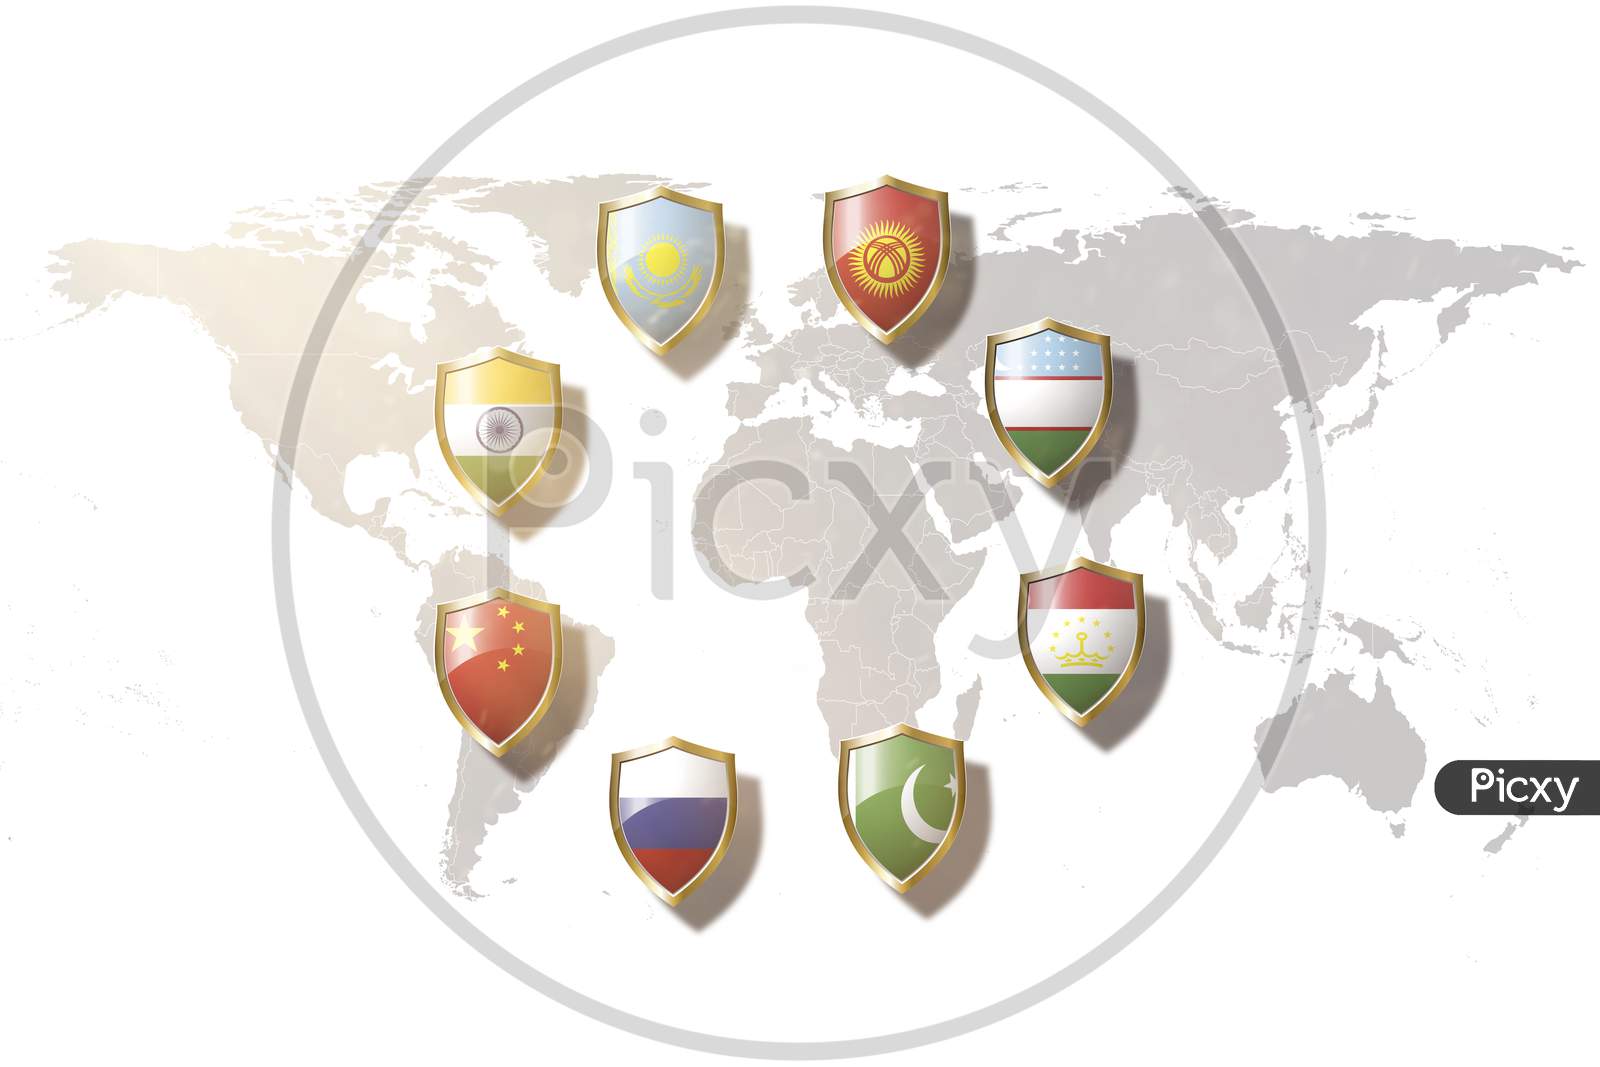 Shanghai Cooperation Organization (Sco) Countries Flags In Golden Shield On World Map Background.